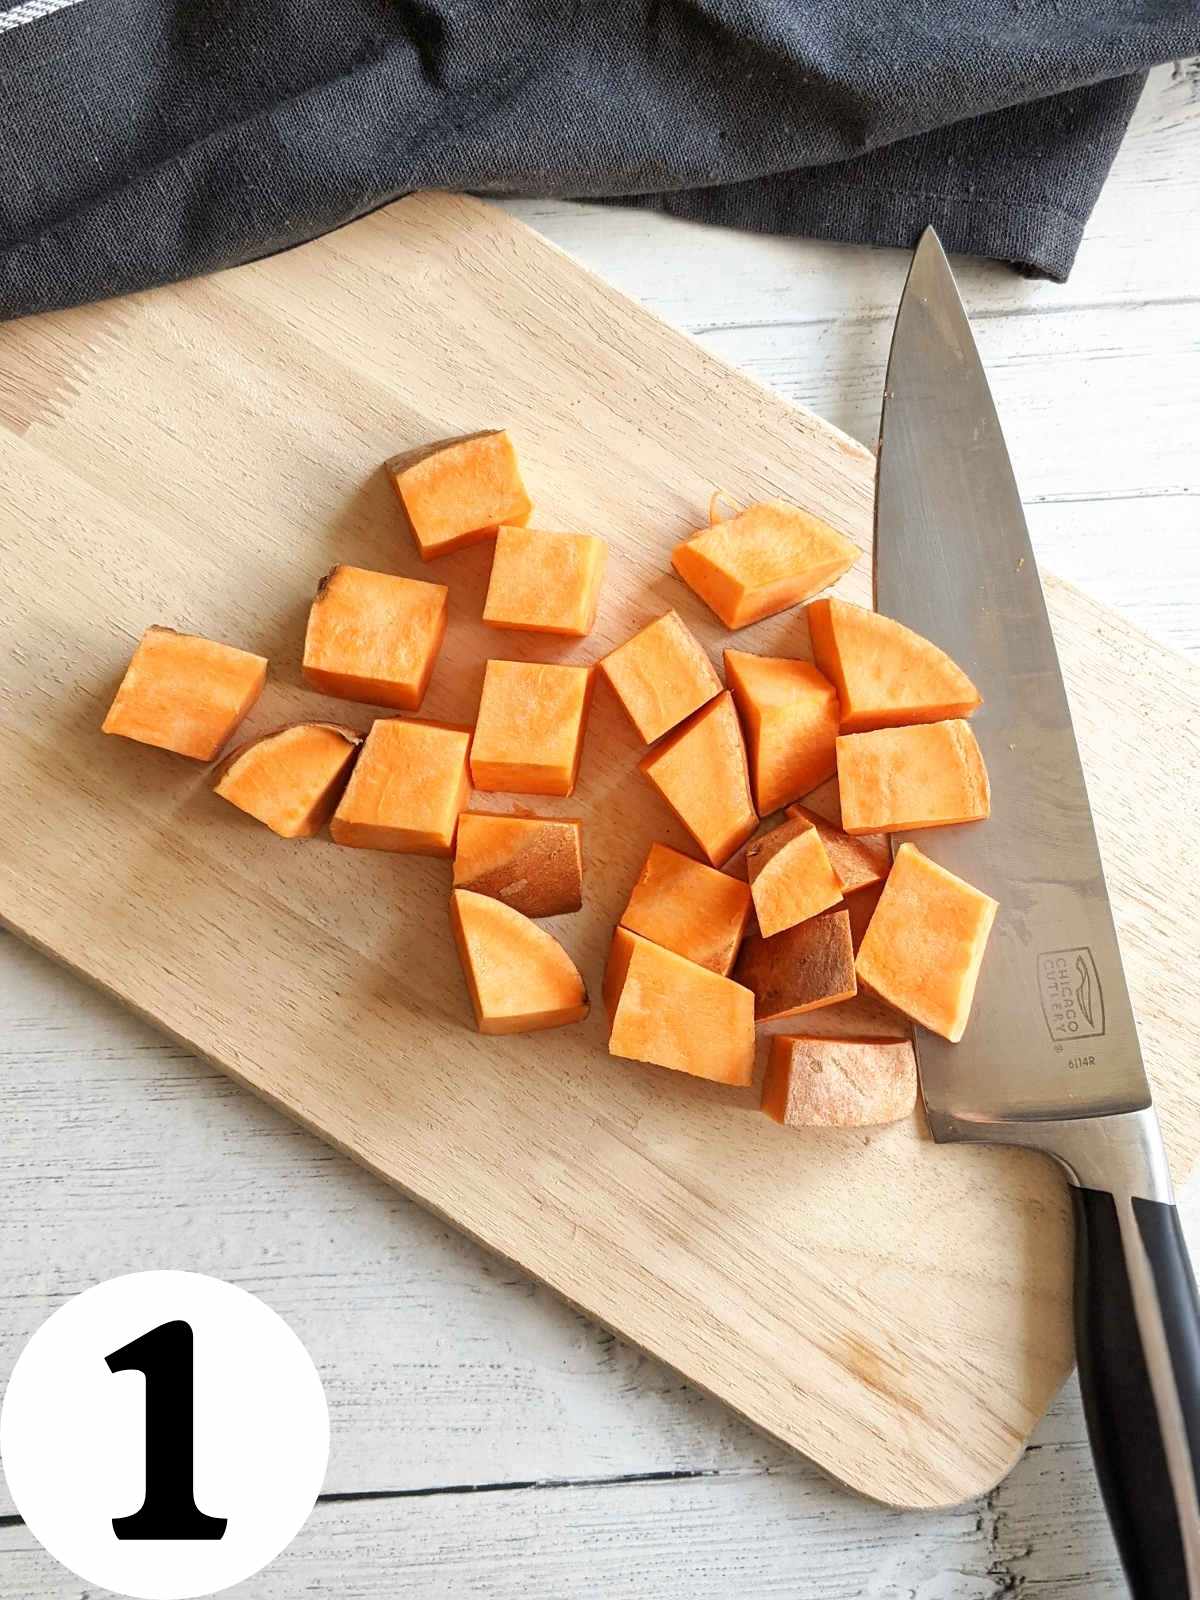 Sweet potato sliced into cubes on a cutting board.